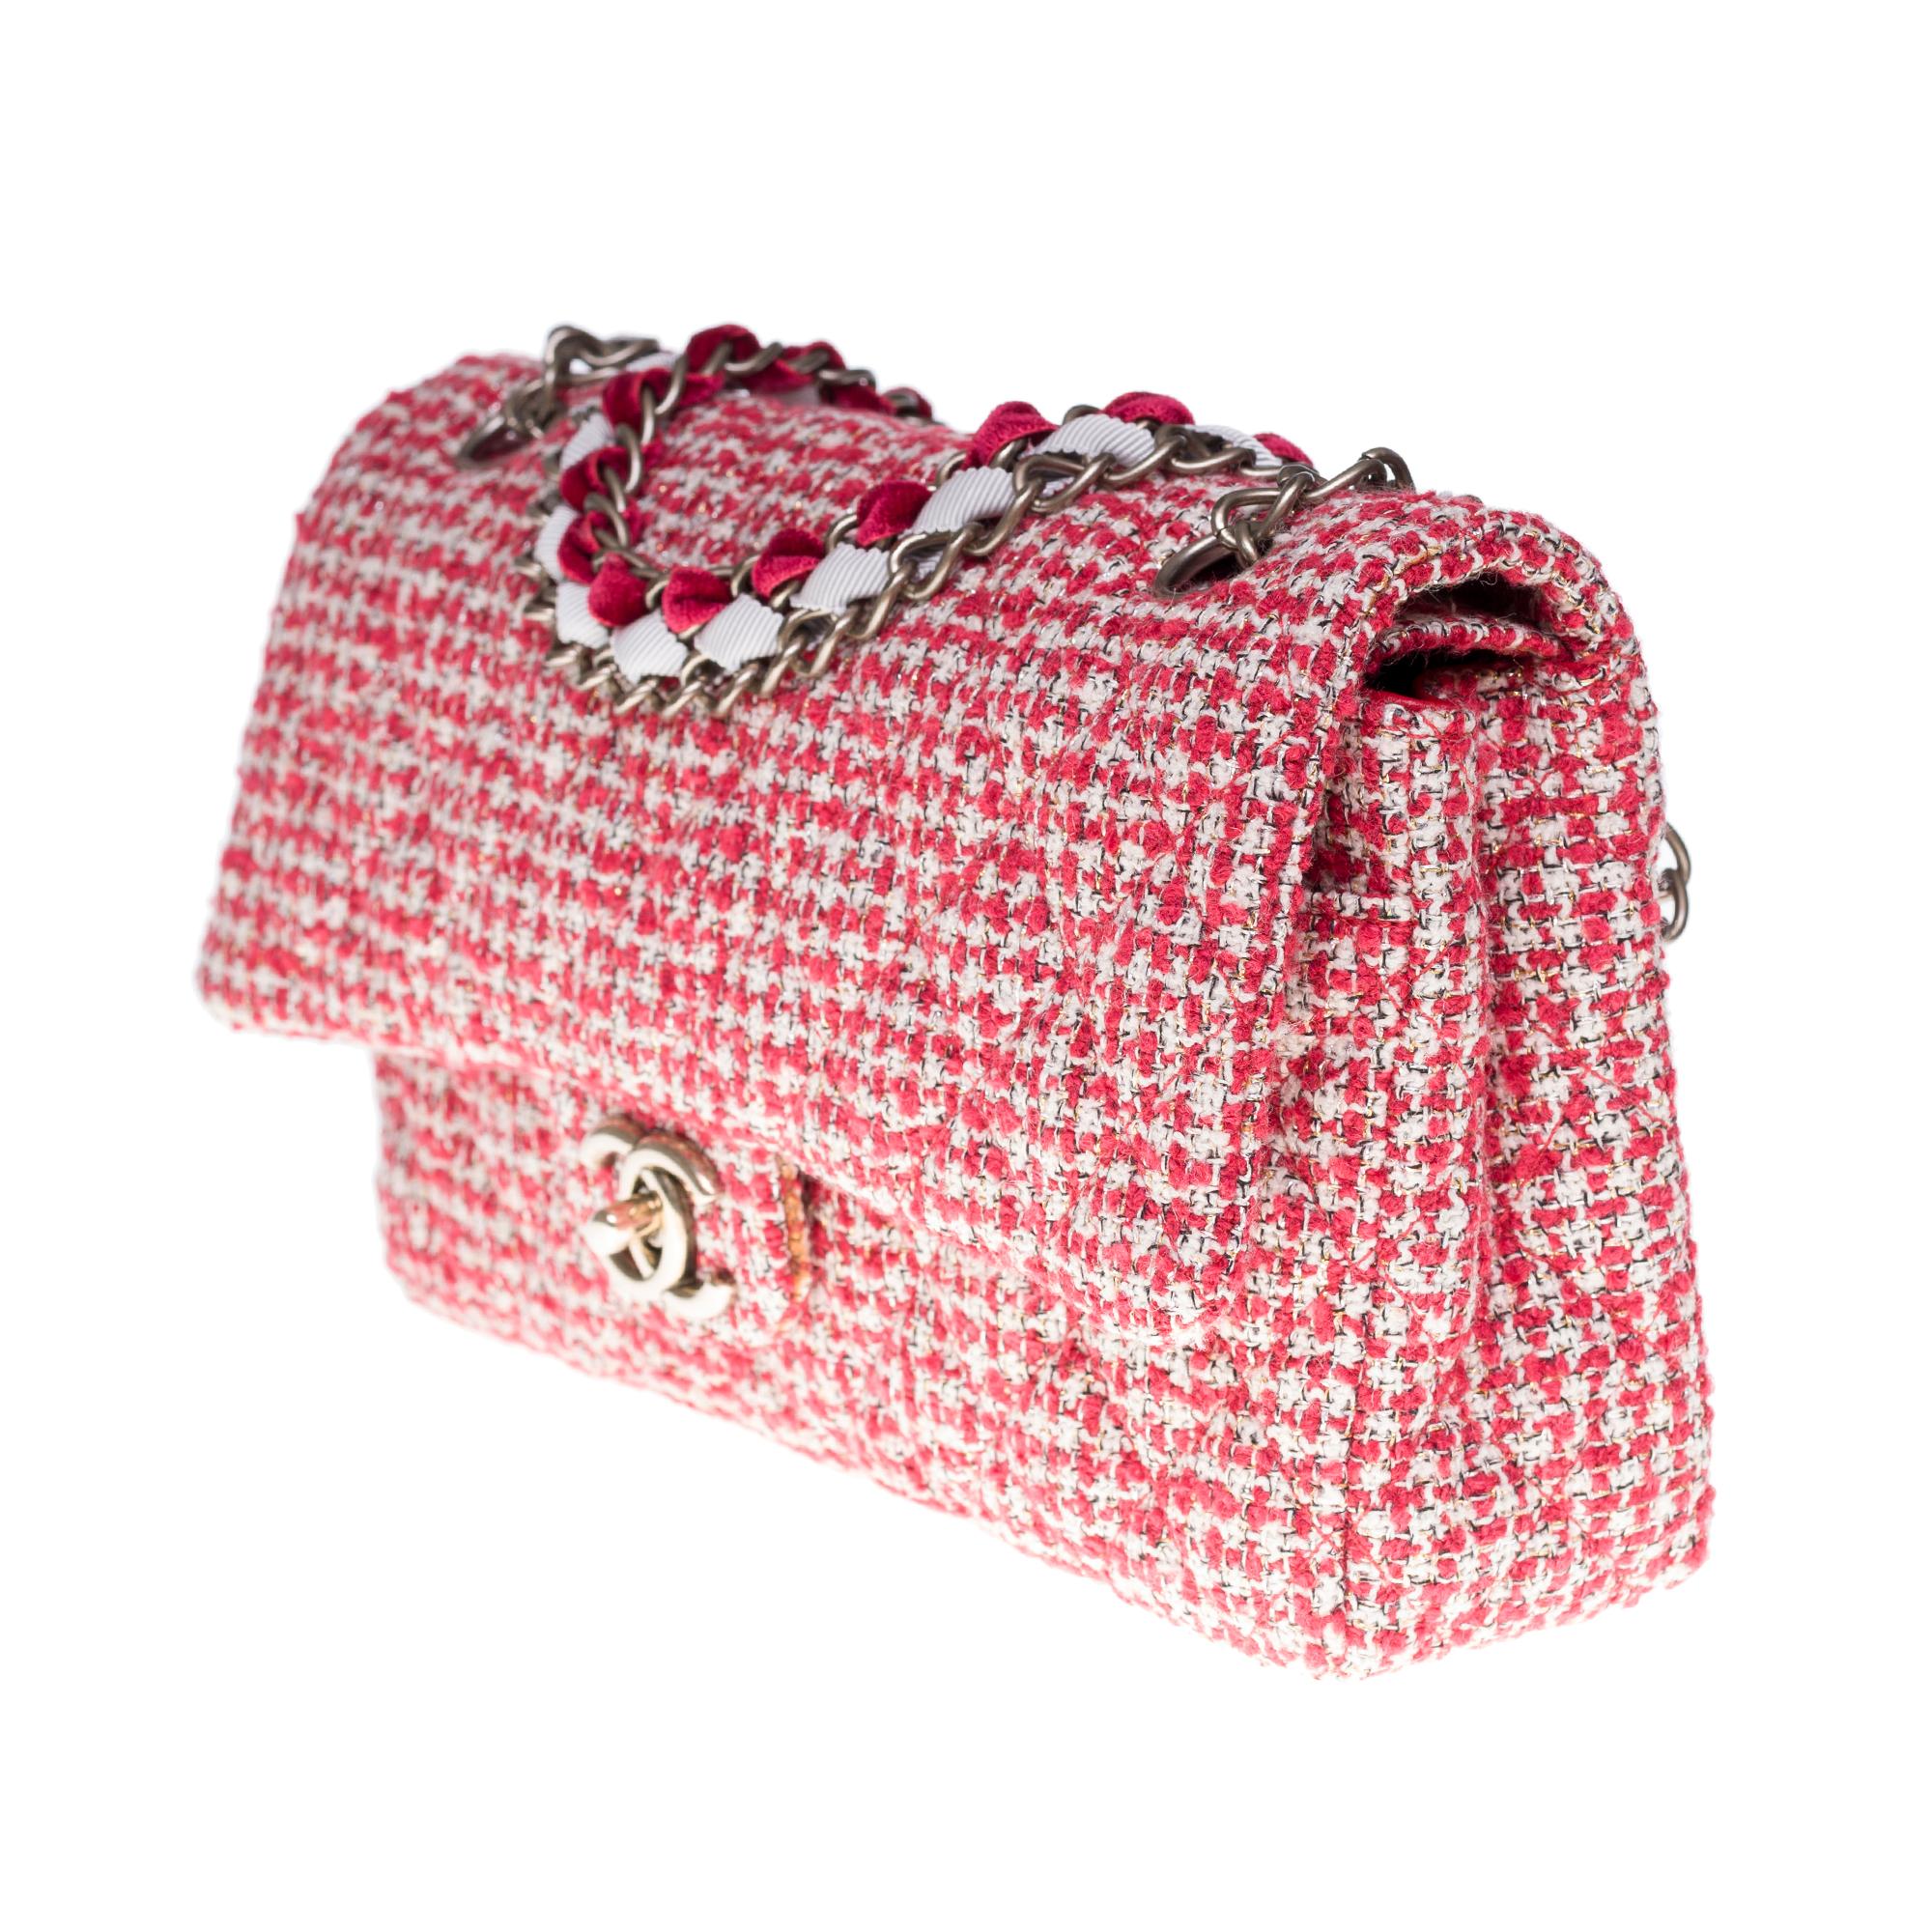 Pink Limited Edition Chanel Timeless Shoulder bag in Red & White Tweed, SHW